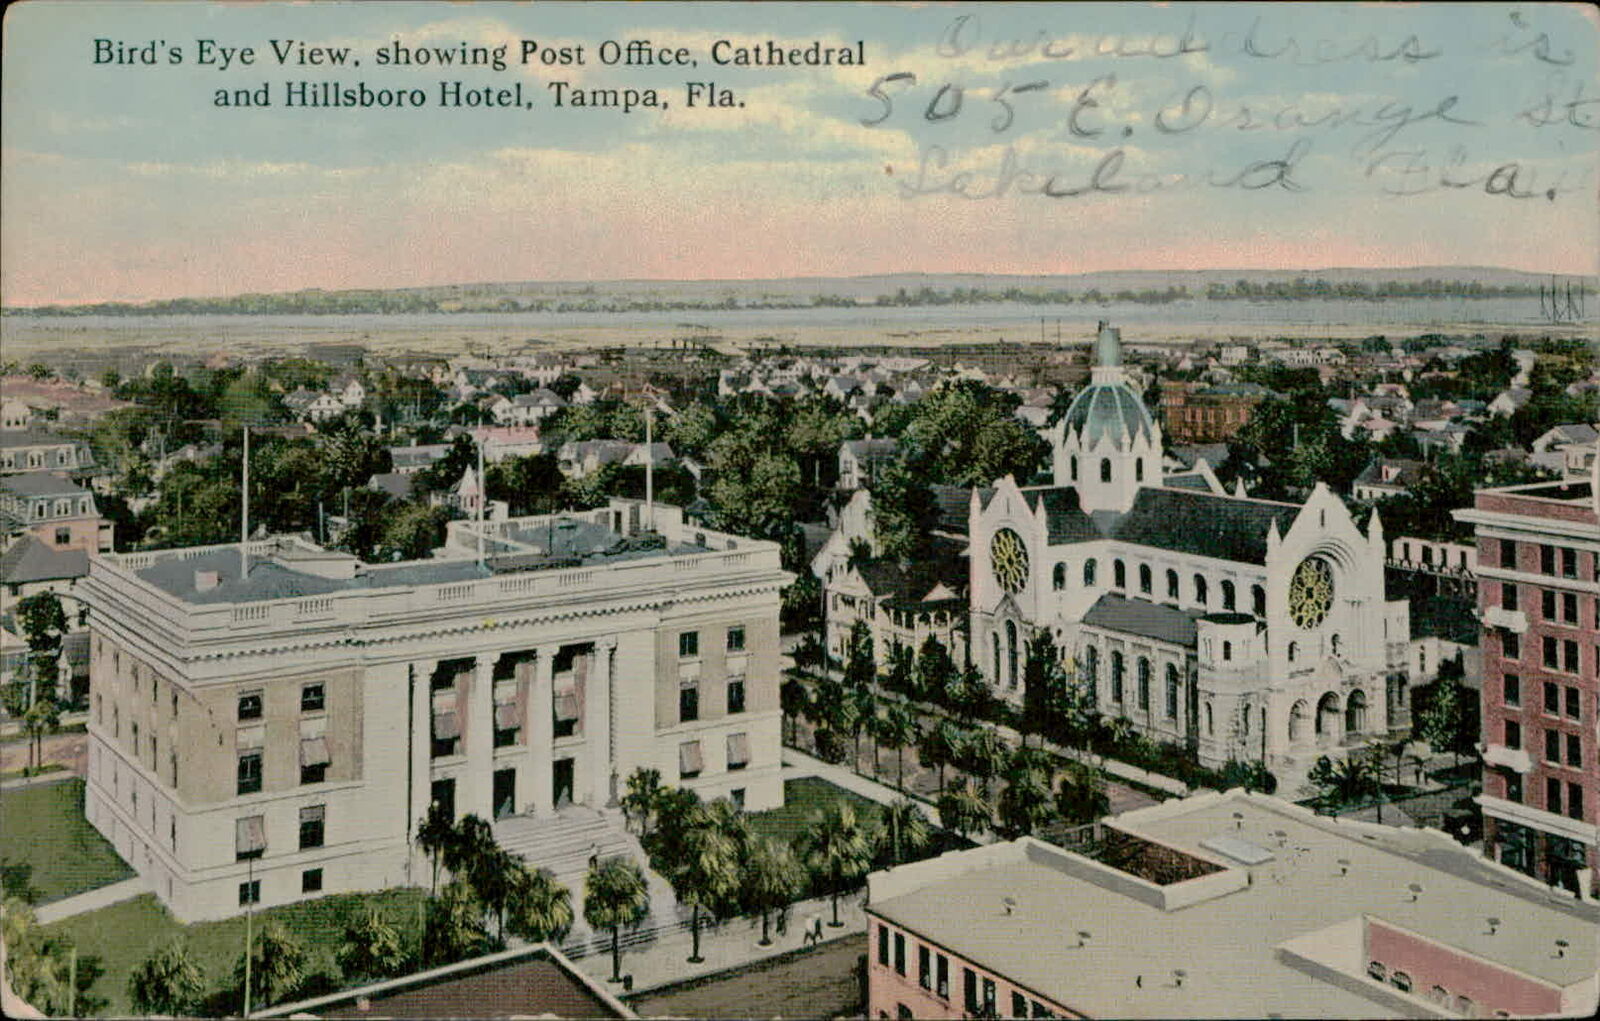 Postcard: Bird's Eye View, showing Post Office, Cathedral and Hillsbor